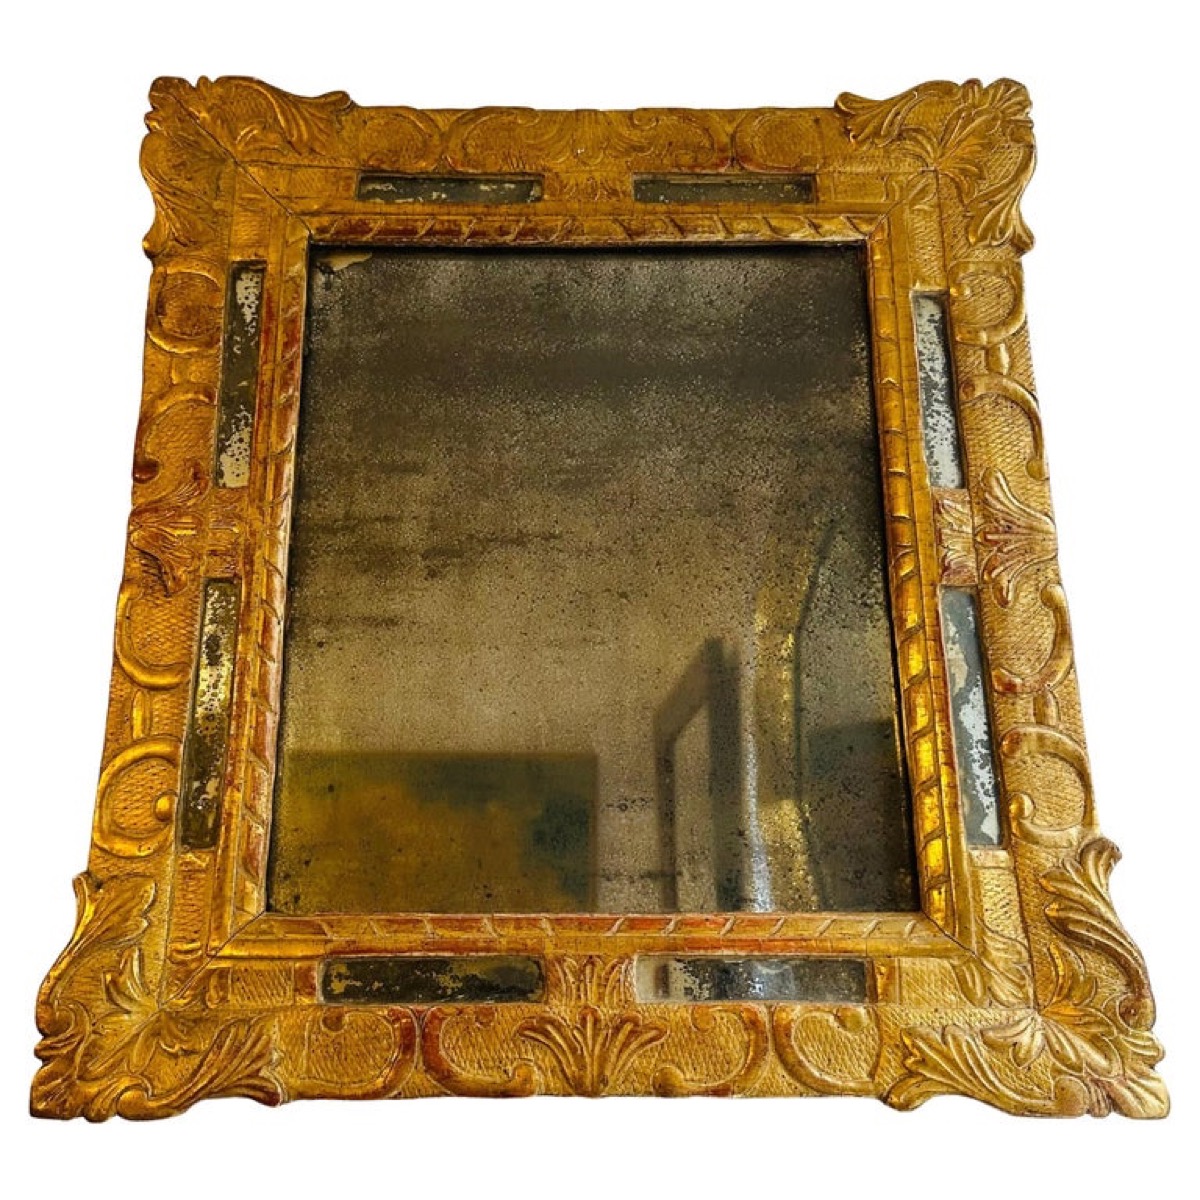 Circa 1740 French Gilt Gilded Framed Wall Mirror with Original Glass 